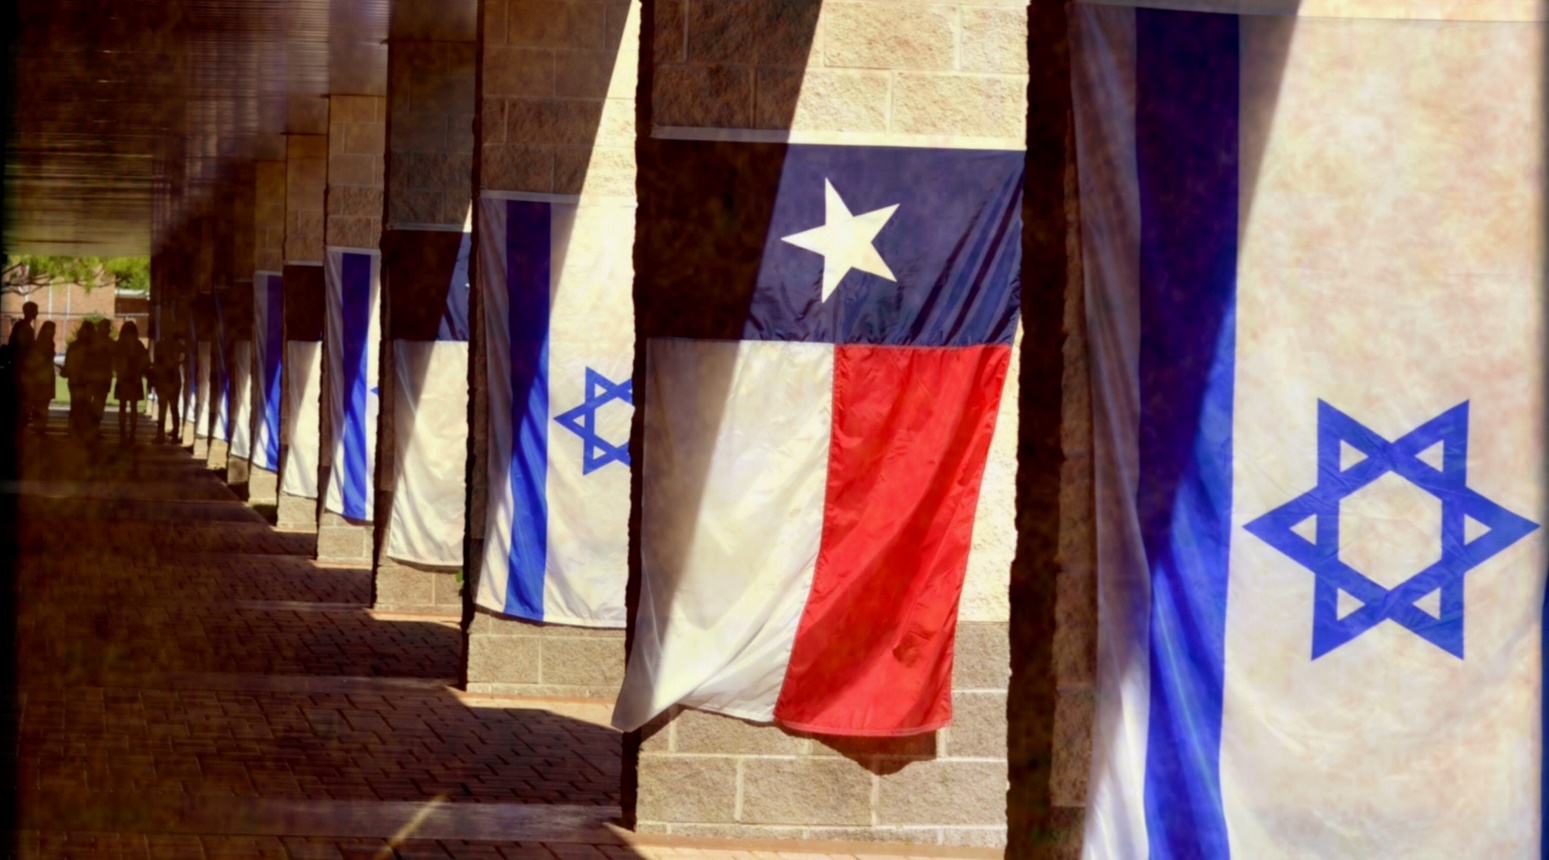 Photo via Texas-Israel Chamber of Commerce Facebook page.